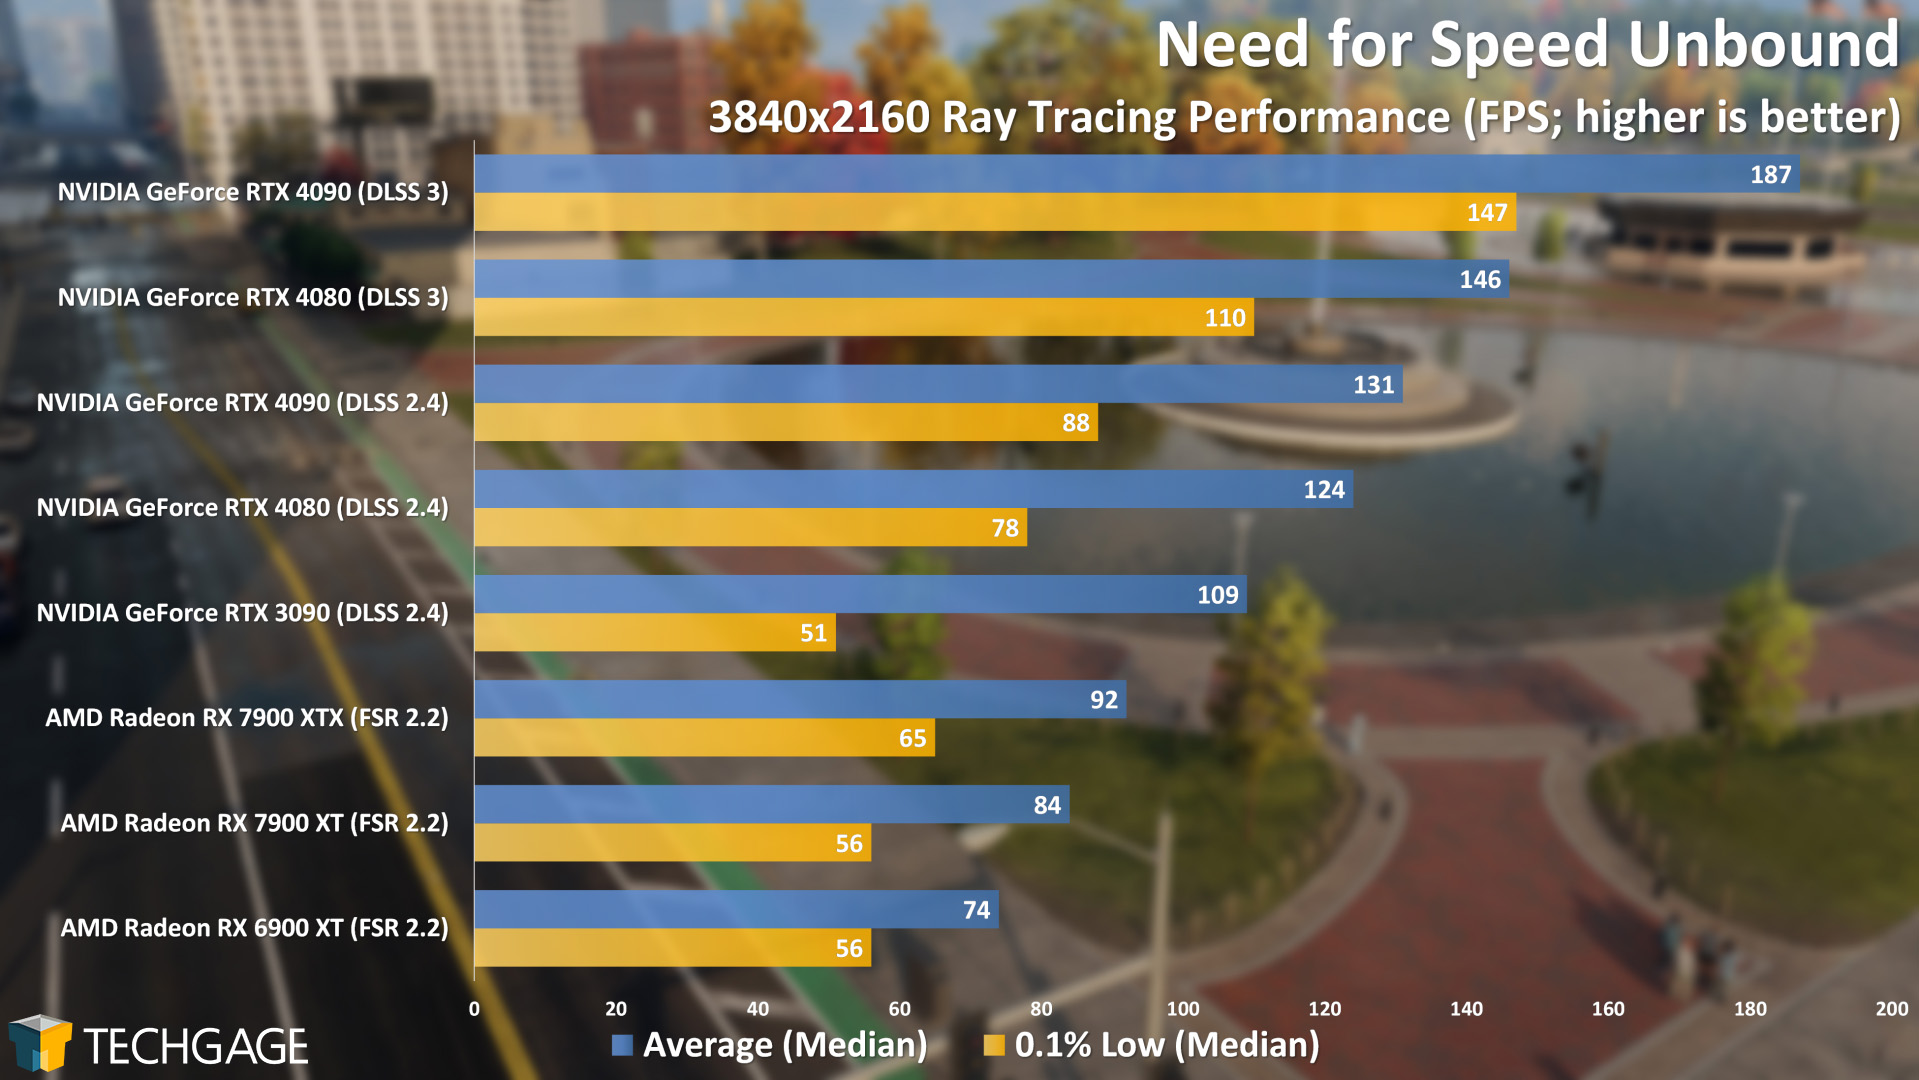 Need for Speed Unbound 4K Ray Tracing Performance (AMD Radeon RX 7900 XT and XTX)